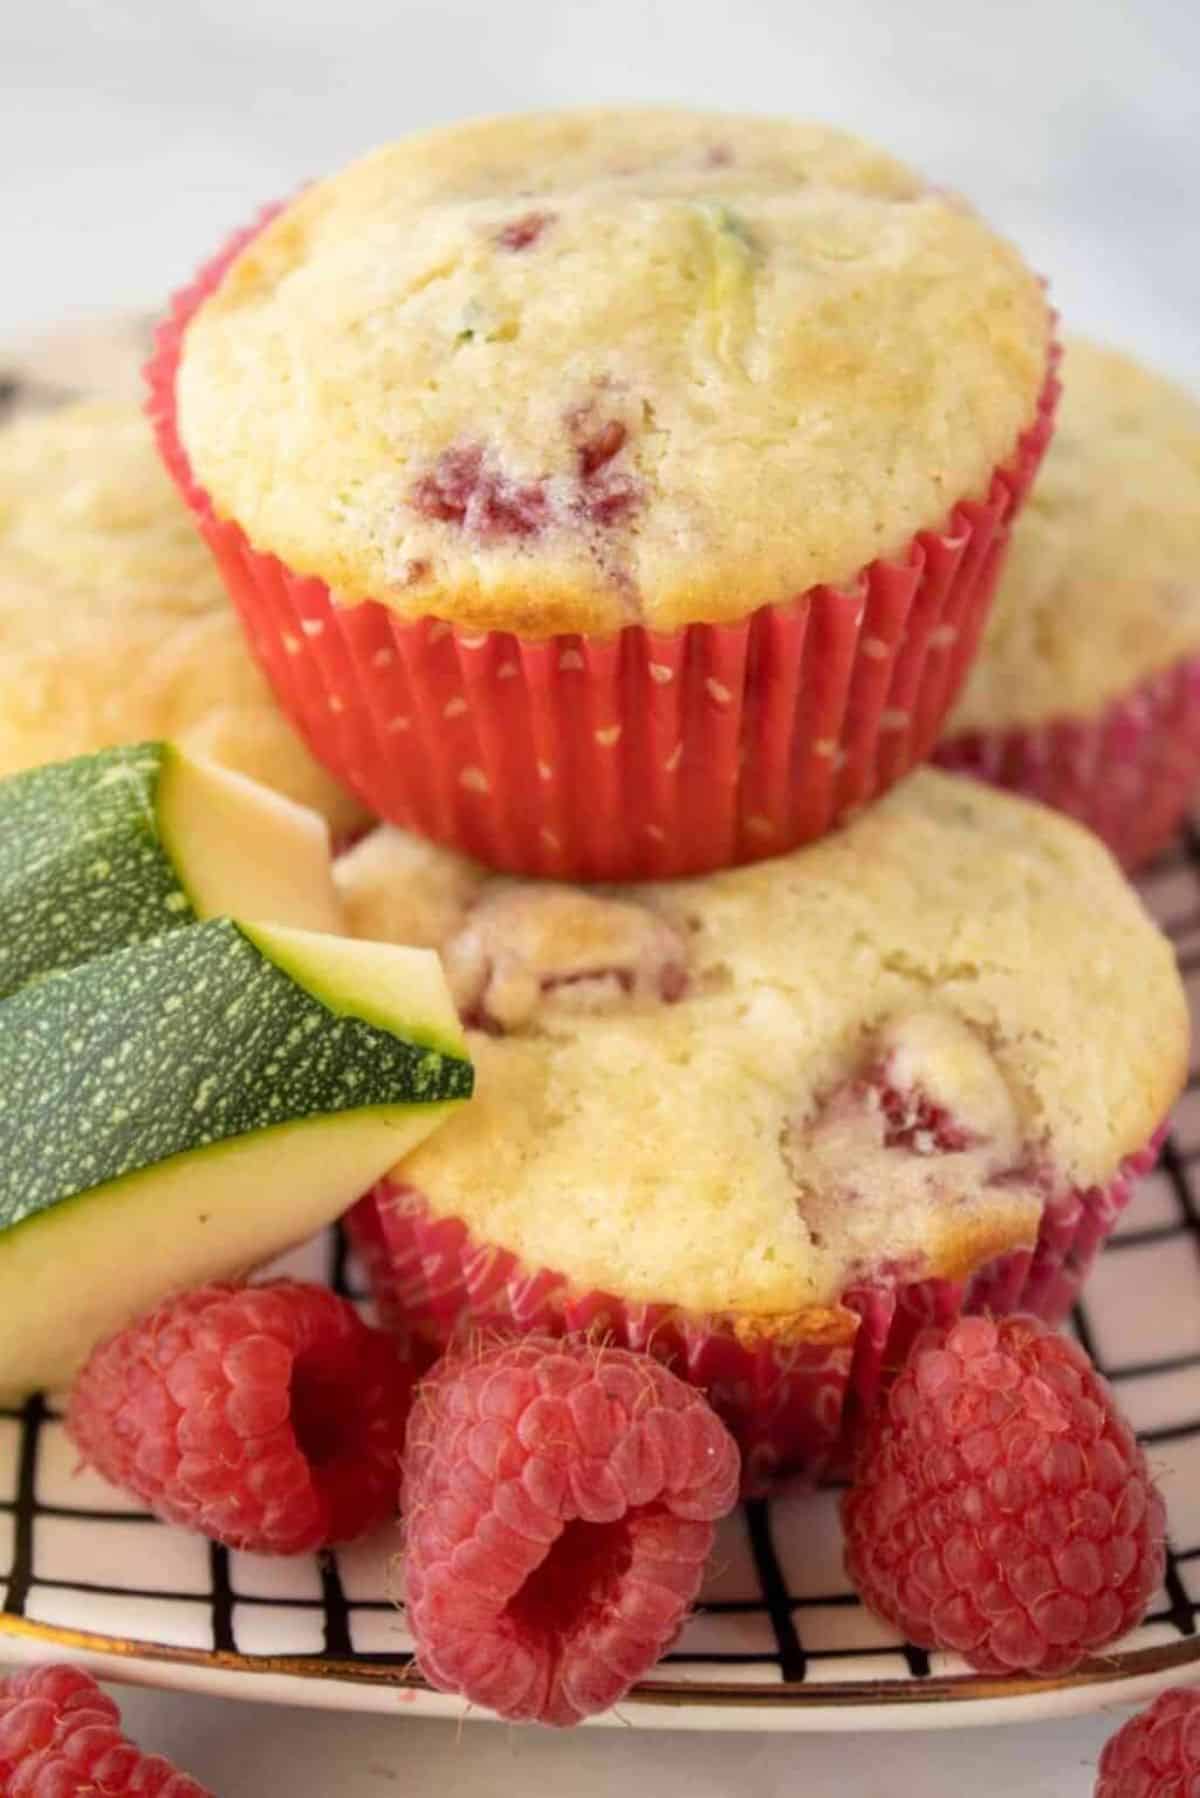 A few delicious Lemon Raspberry Zucchini Muffins on a plate.